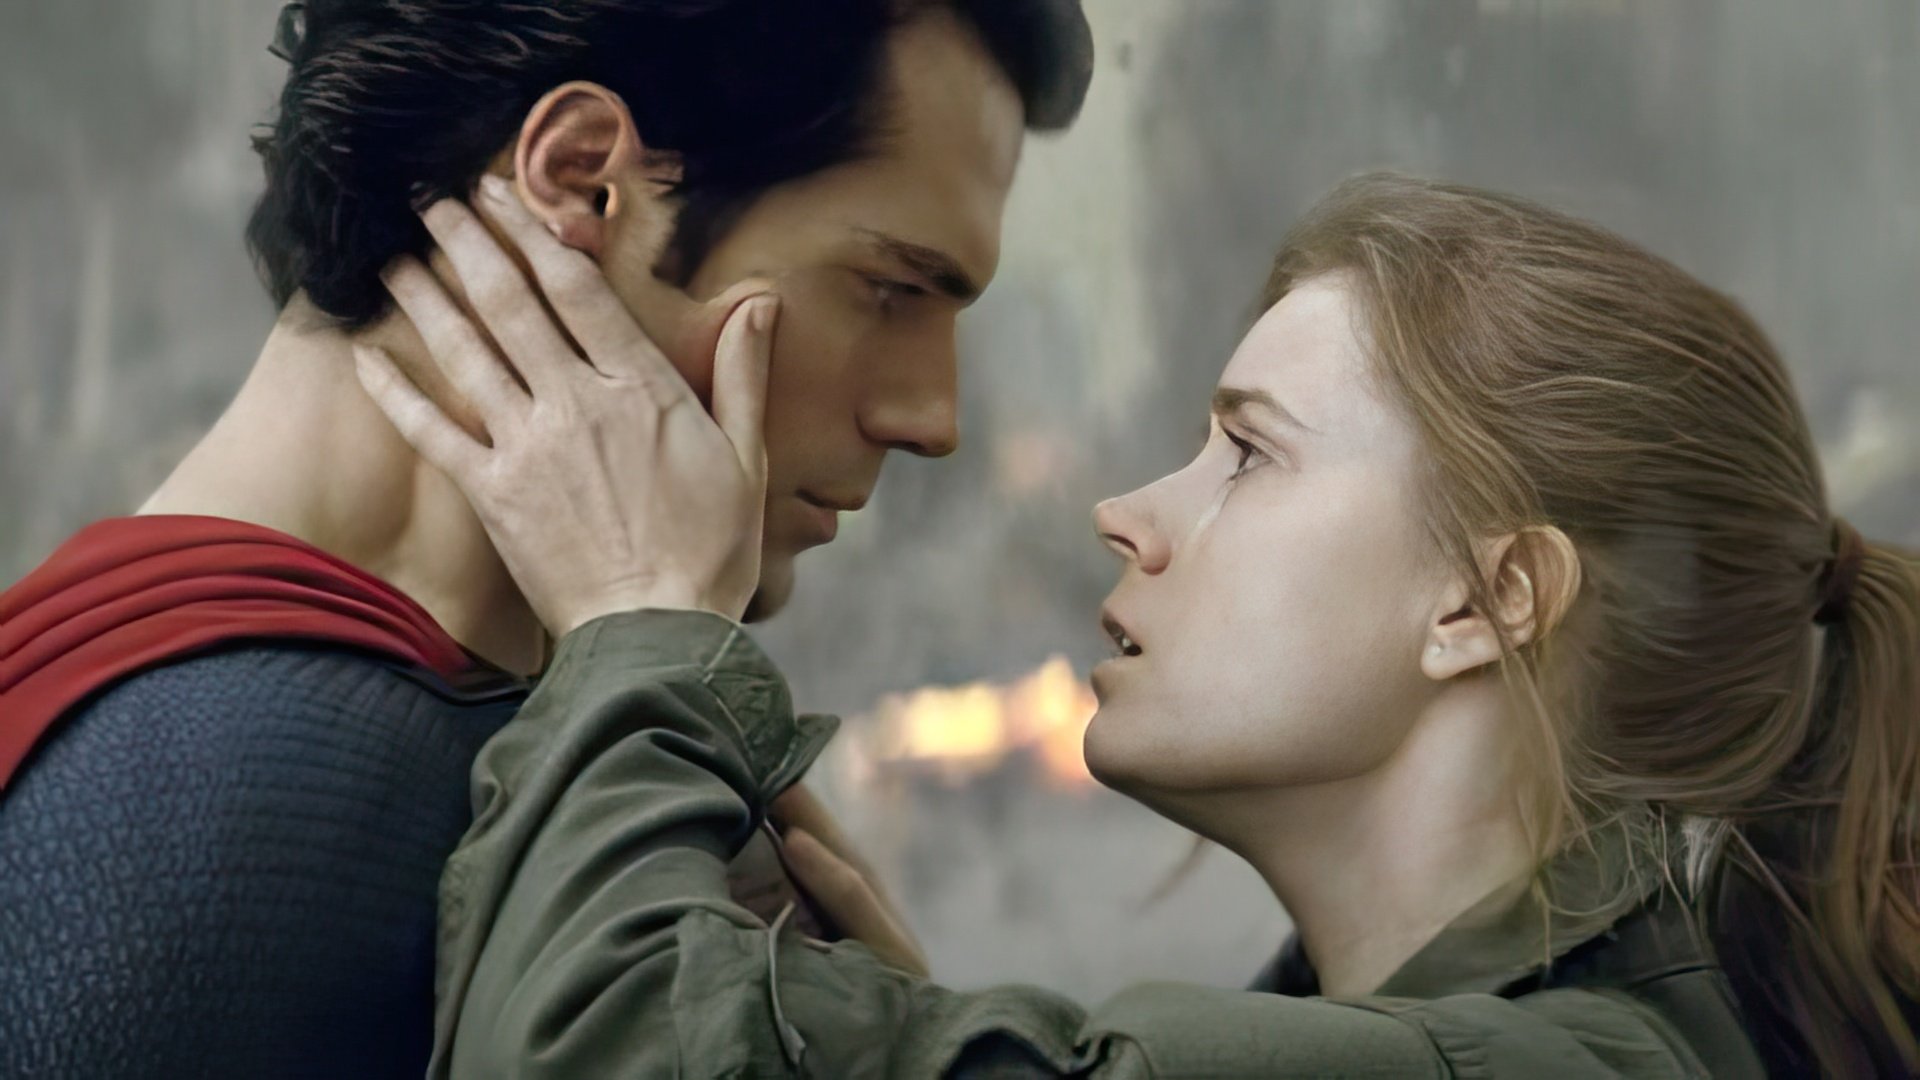 Amy Adams became Superman’s girlfriend in 2013